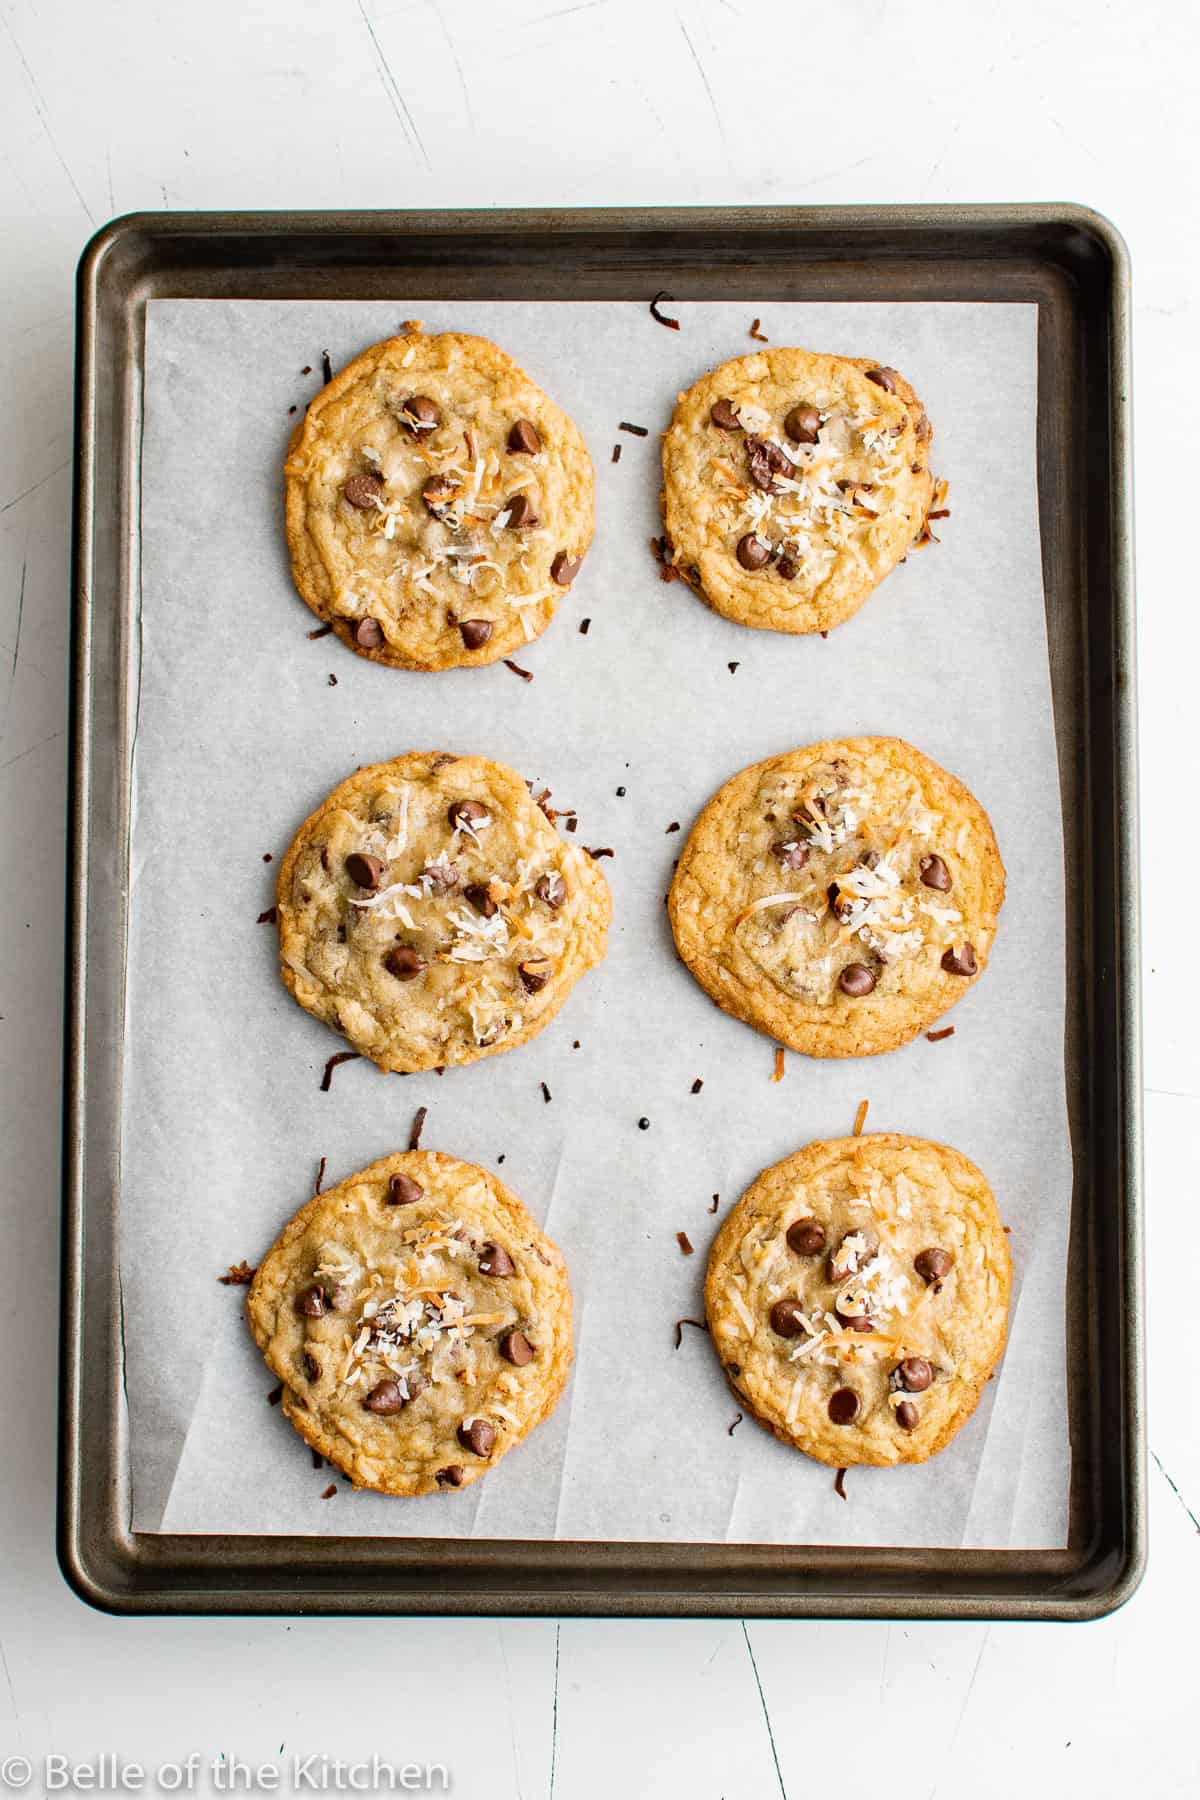 baked cookies on a baking sheet.